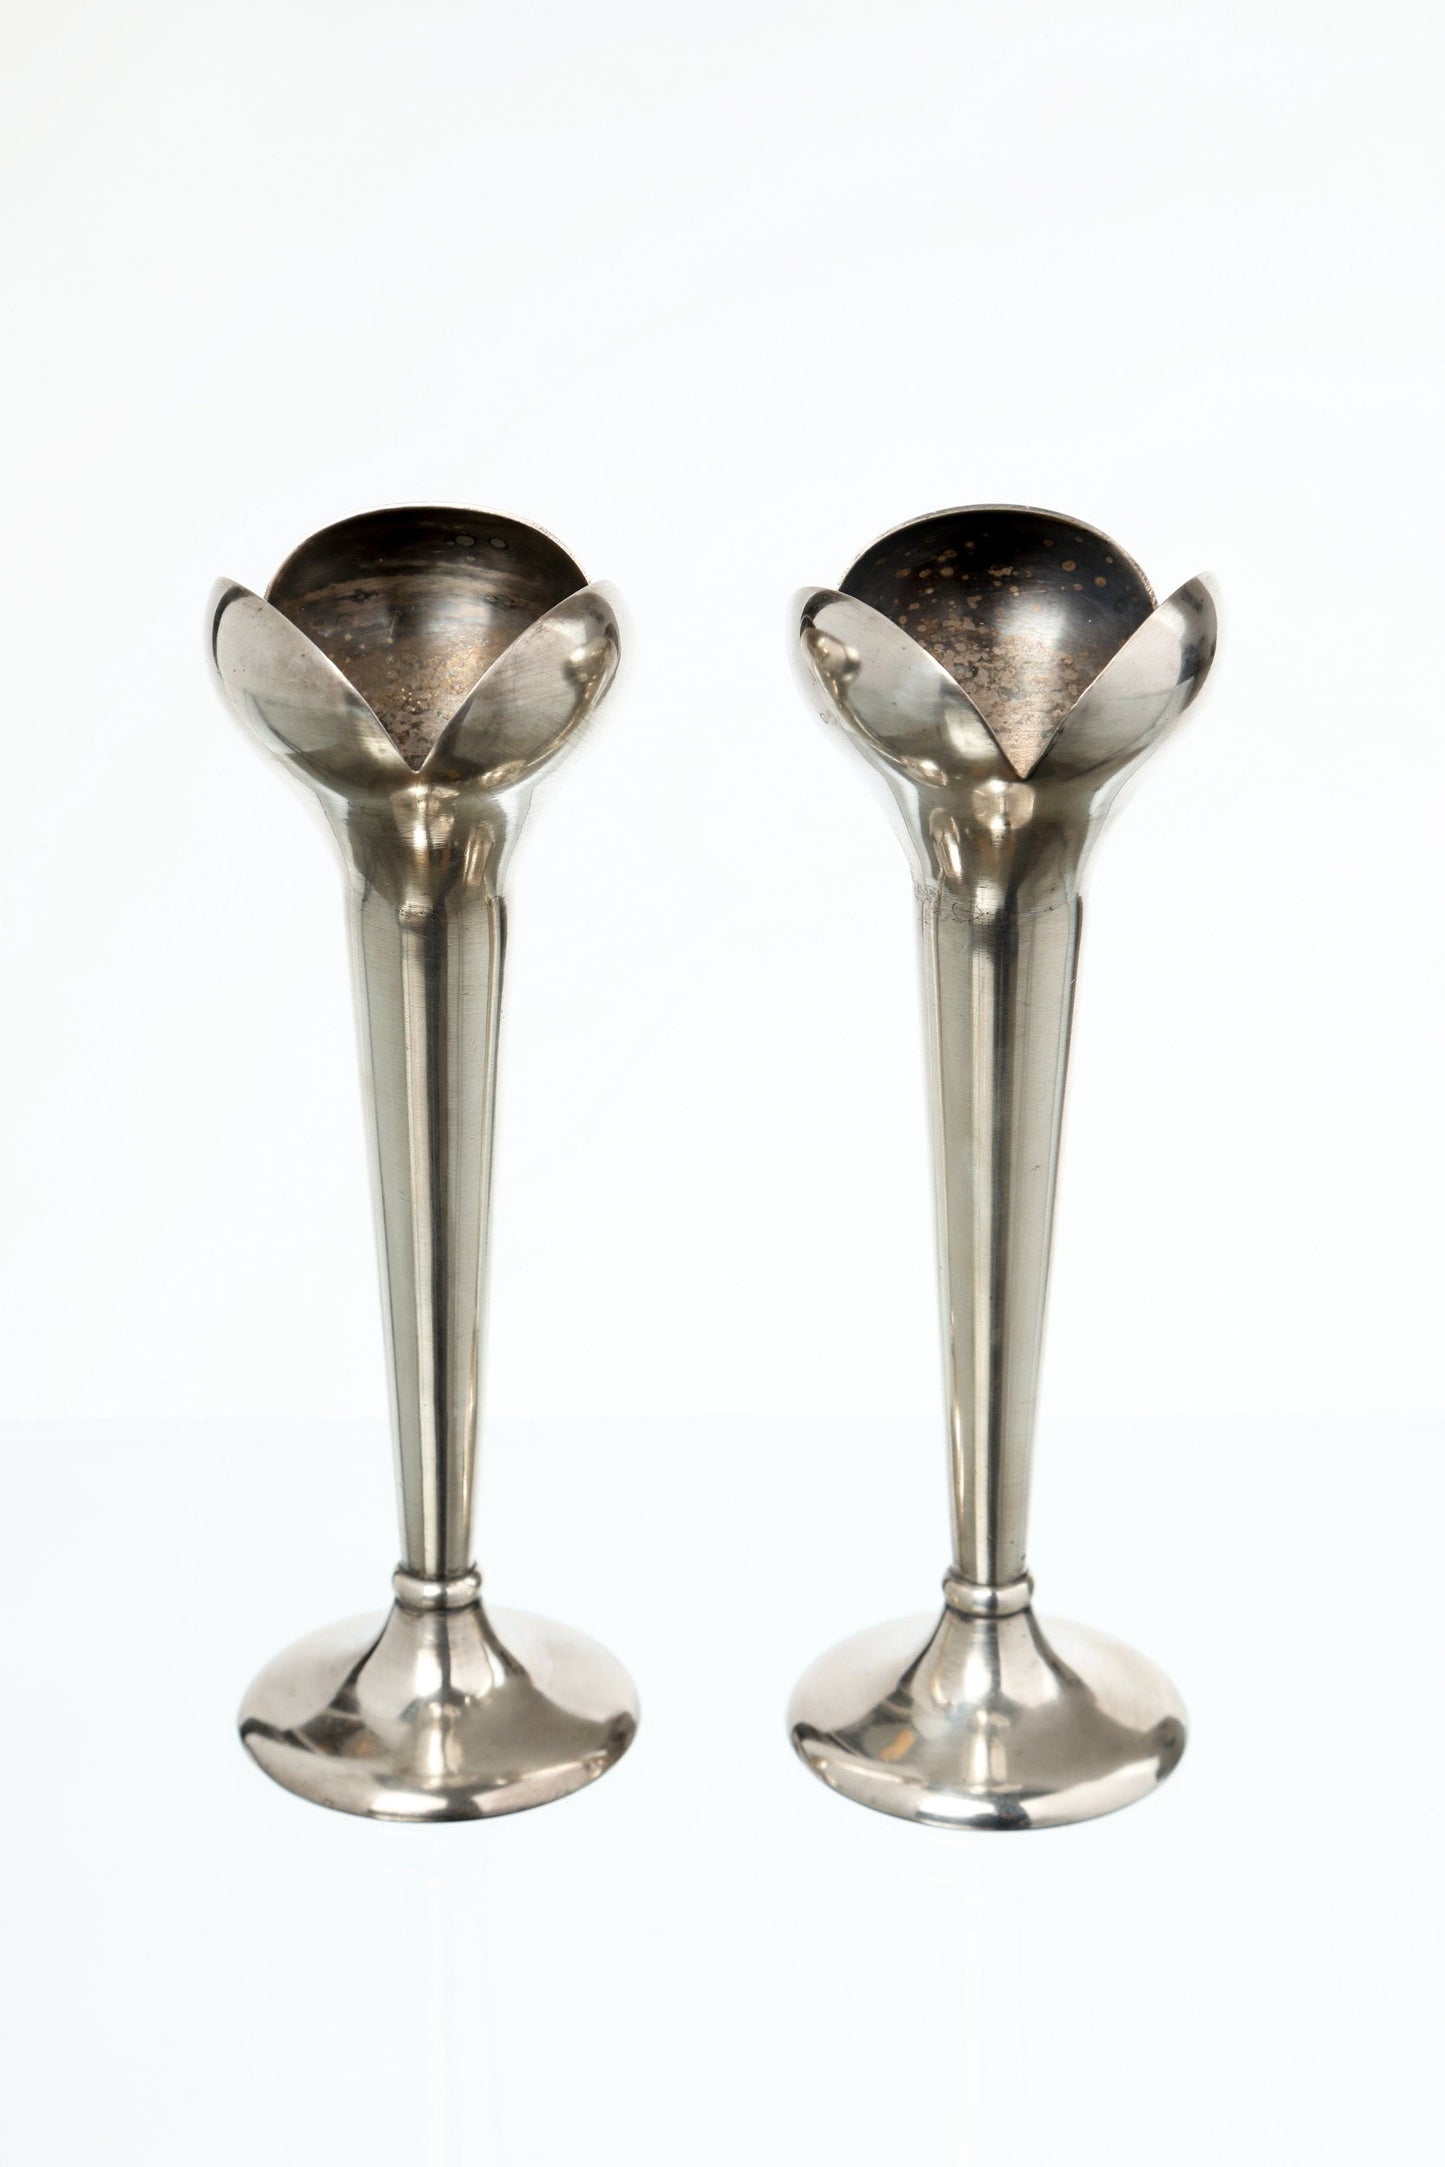 Pair of soliflore vases from the late 1960s by Gio Ponti for Fratelli Calderoni